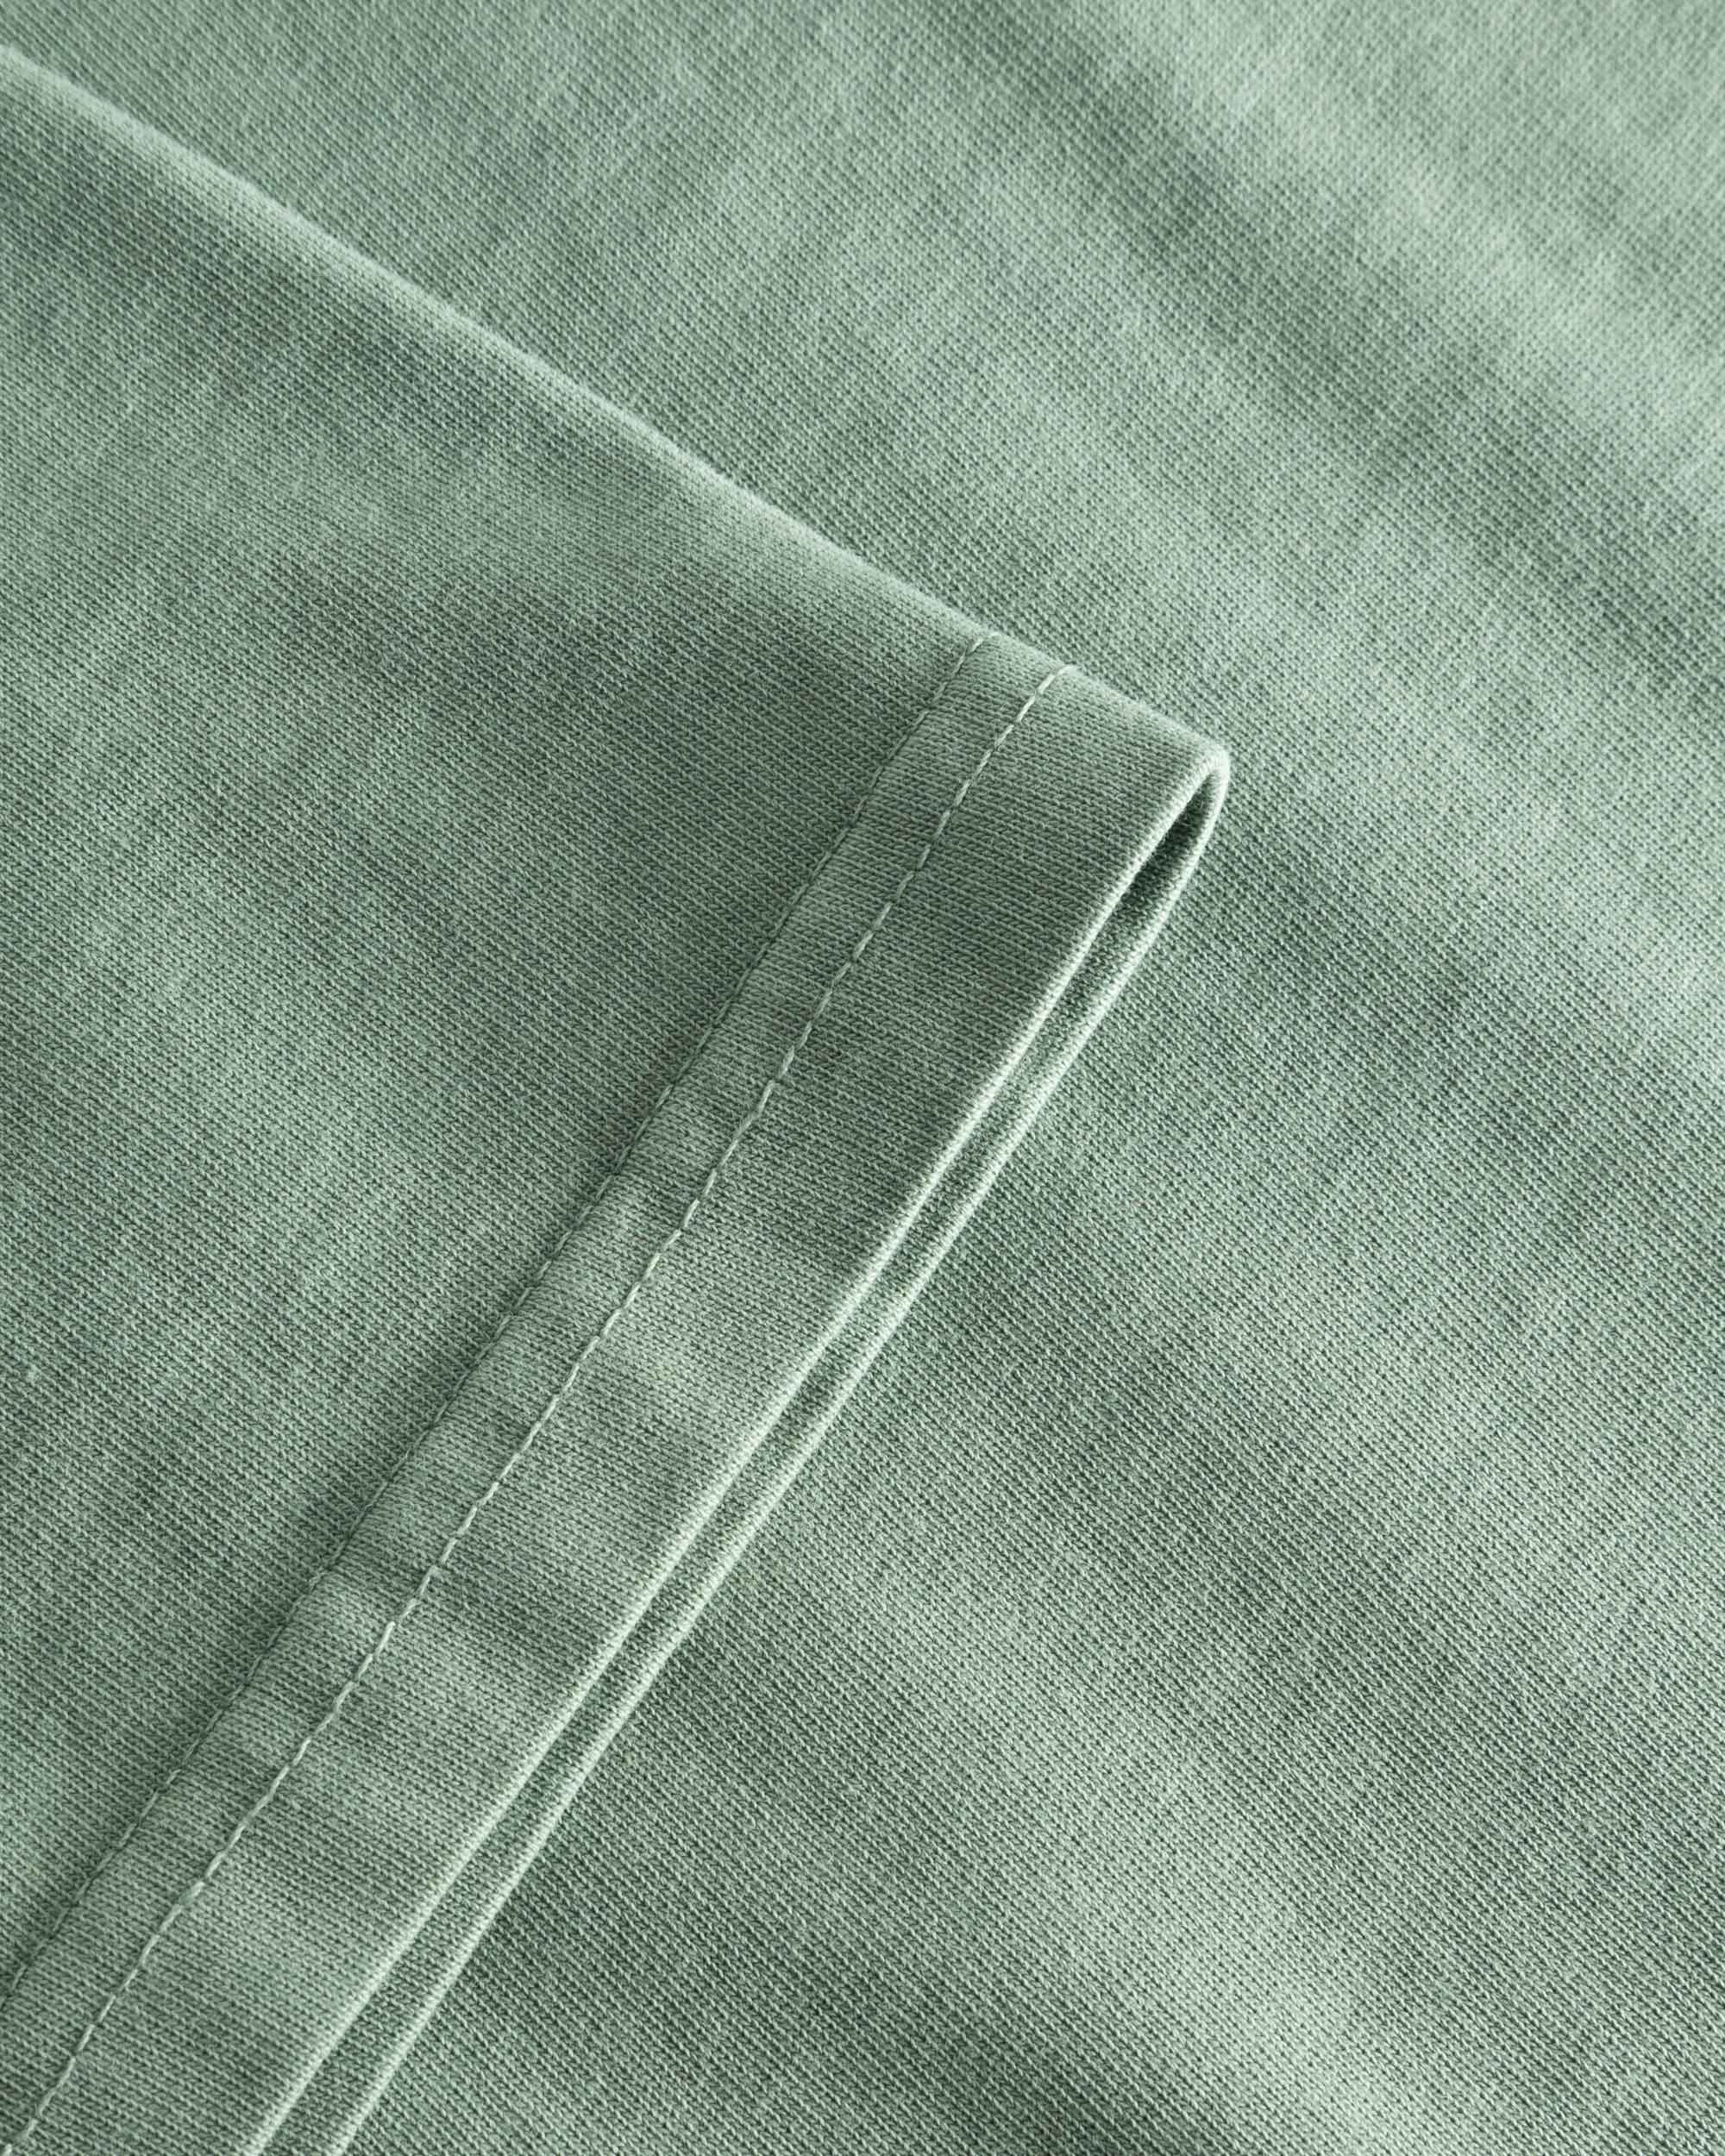 Close-up view of the sleeve and stitchings on a green t-shirt